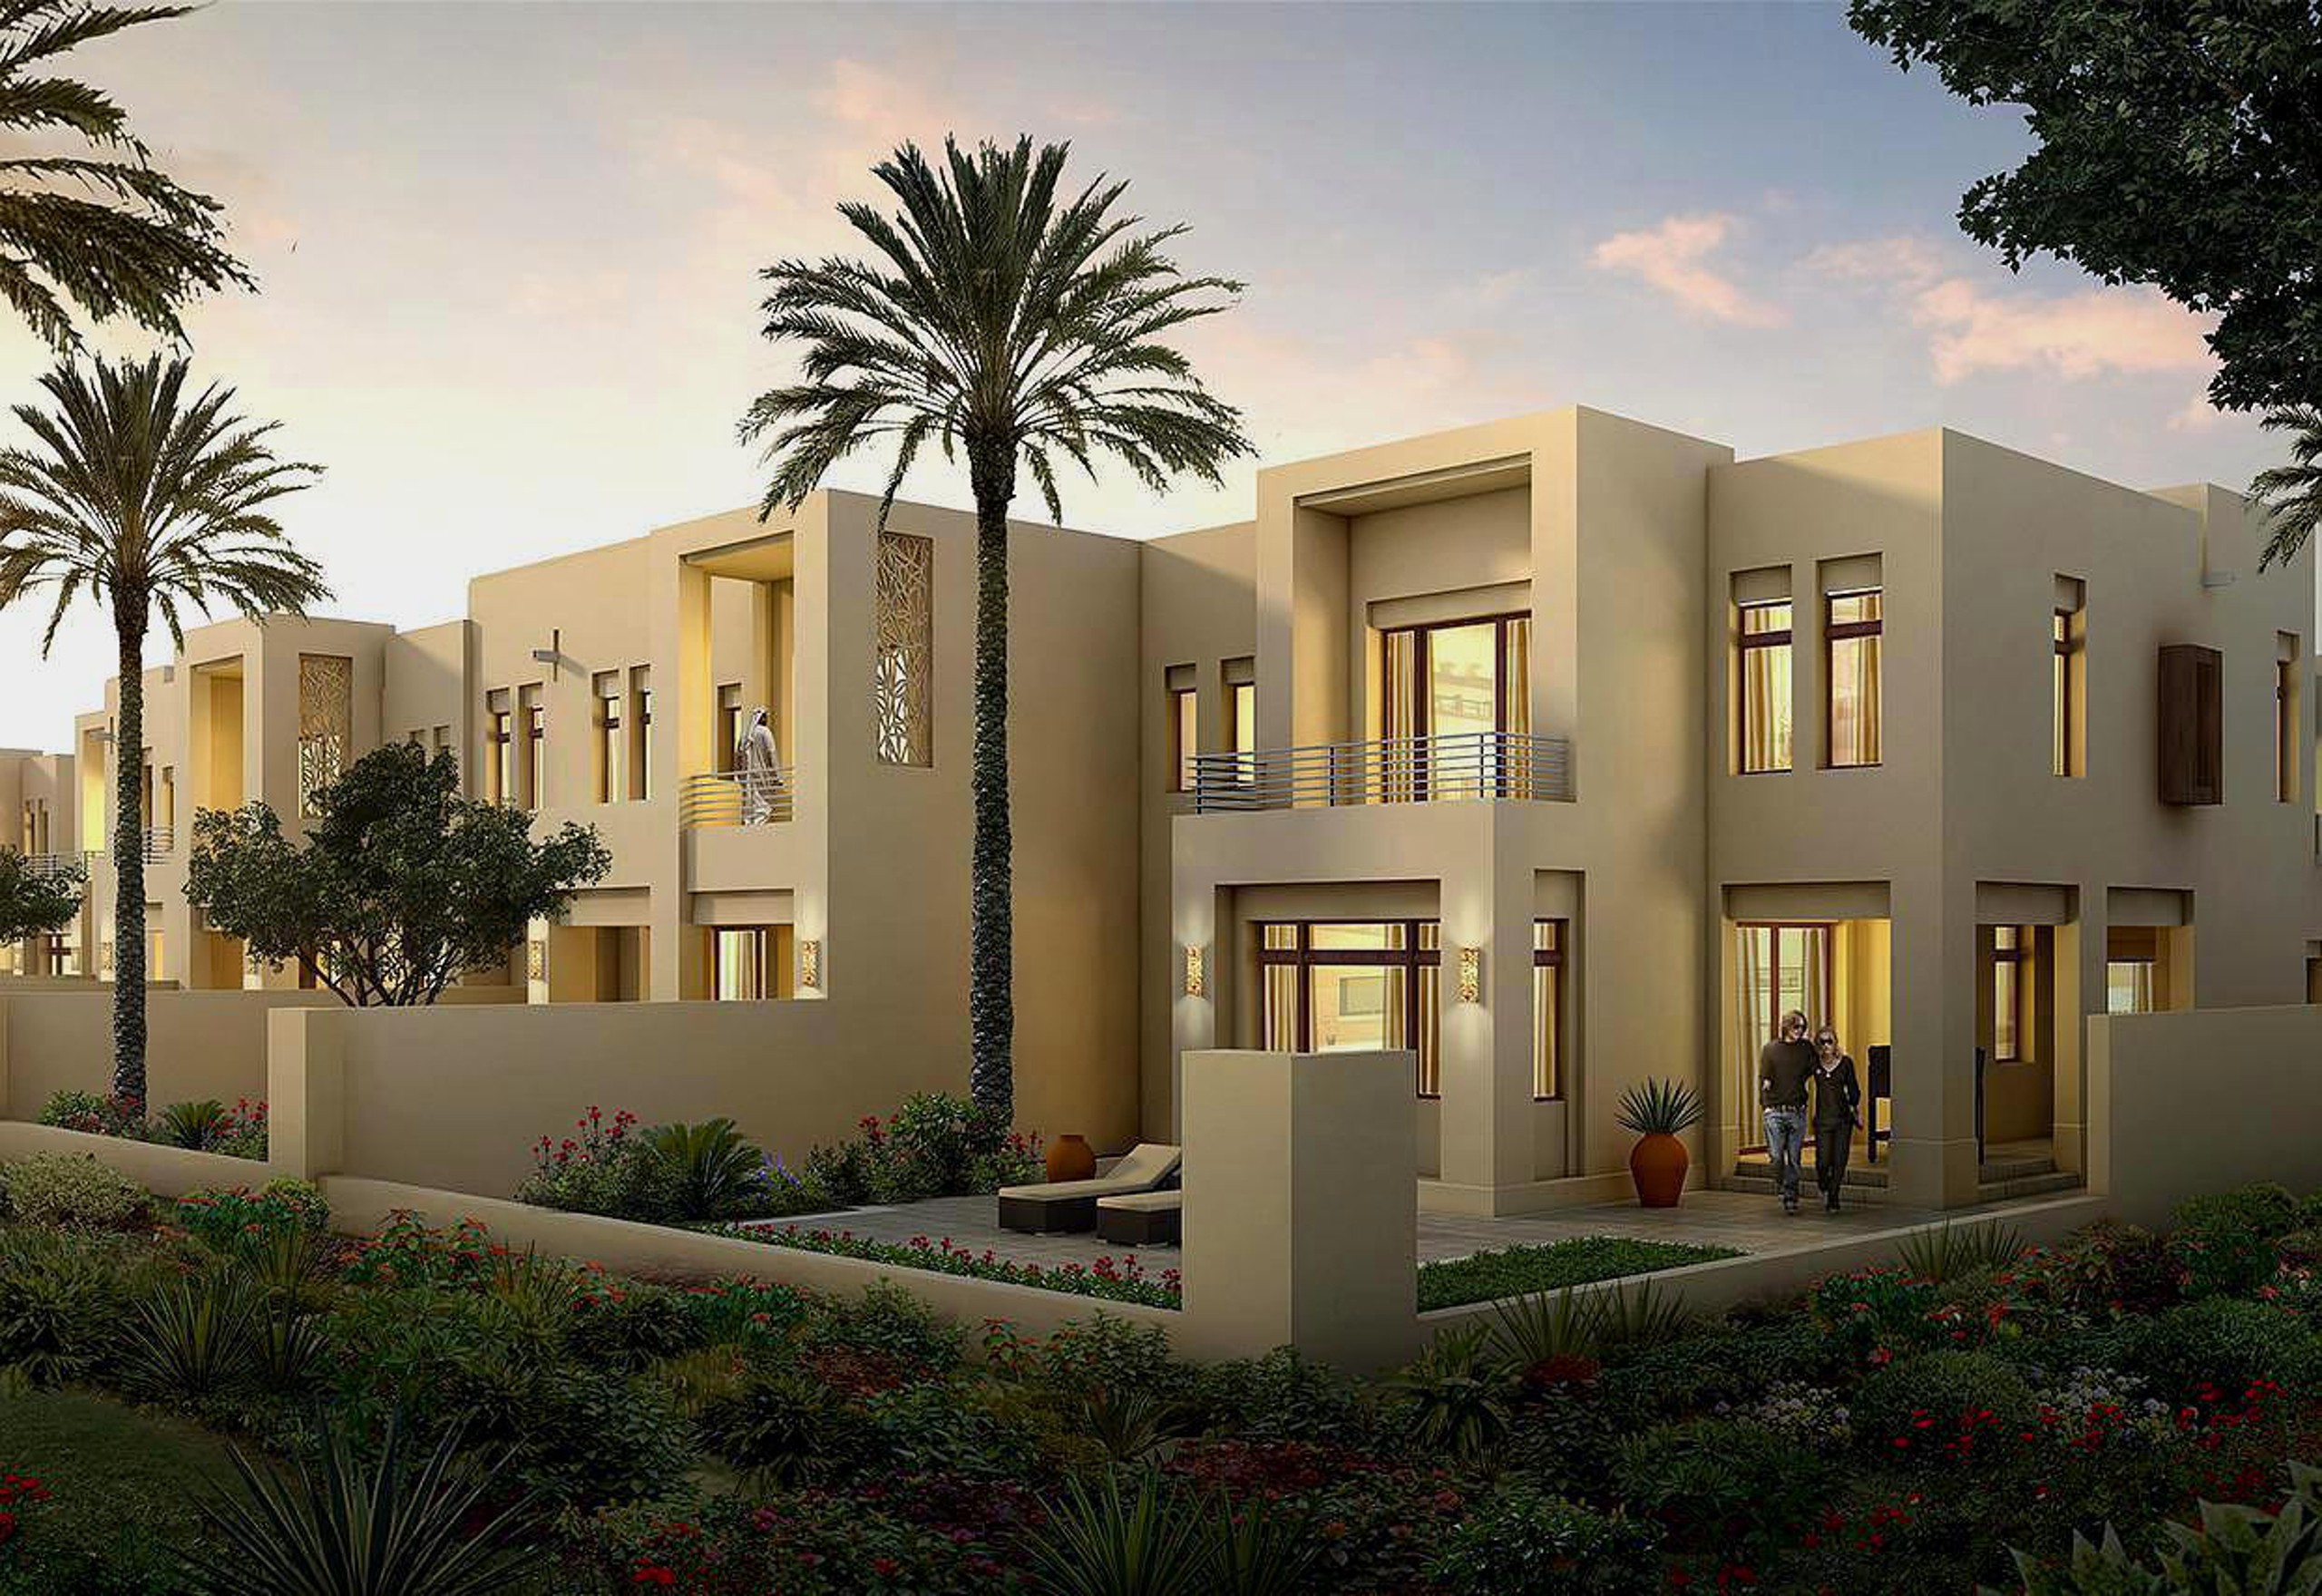 uploads/sale_property/4-br-townhouses-for-sale-in-mira-oasis-iii/85dd4f35b8e4aea685c4f61cf2c6f7d1.webp